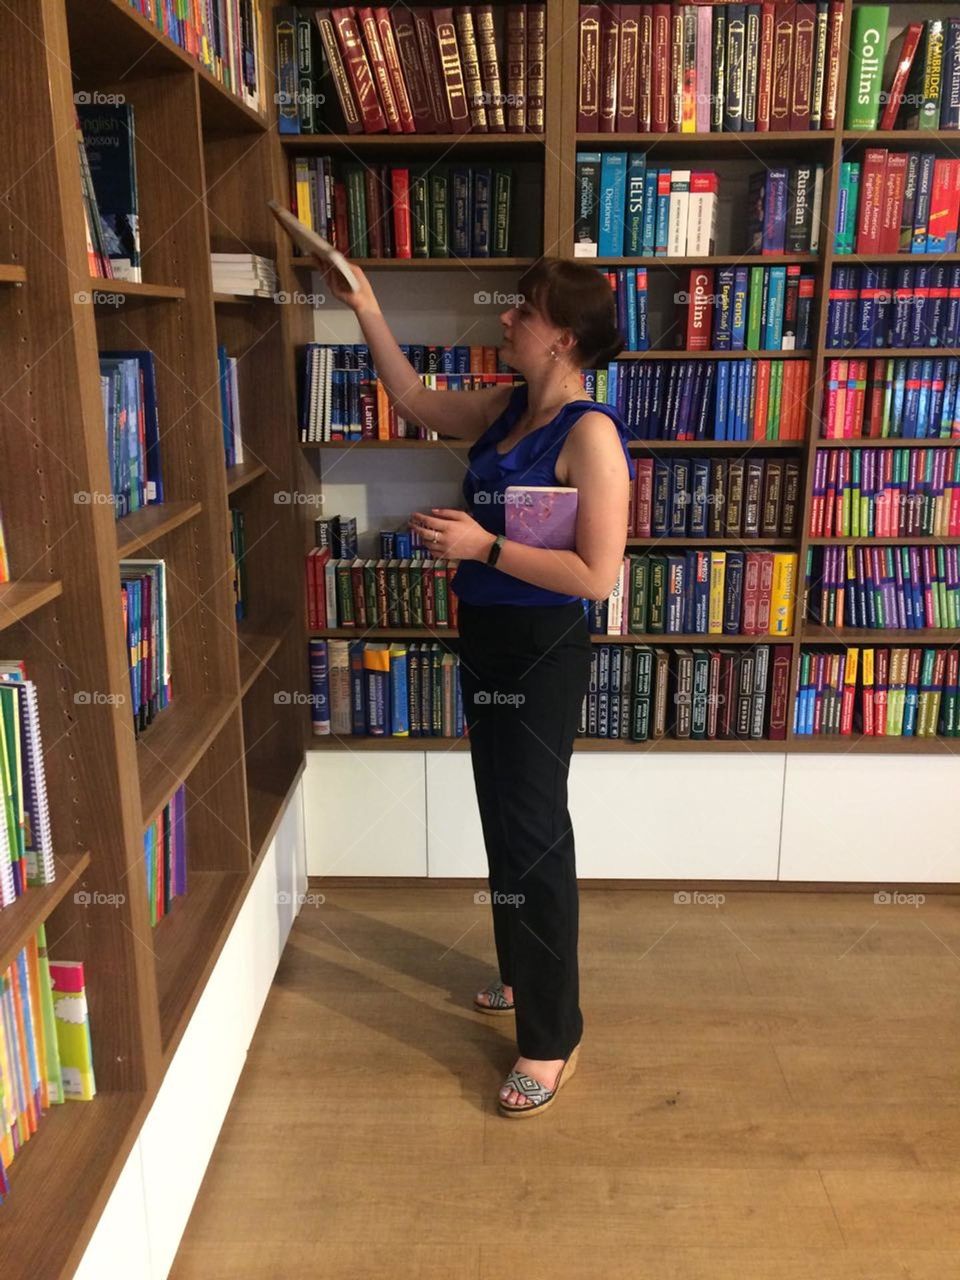 A girl in a bookstore chooses literature to read